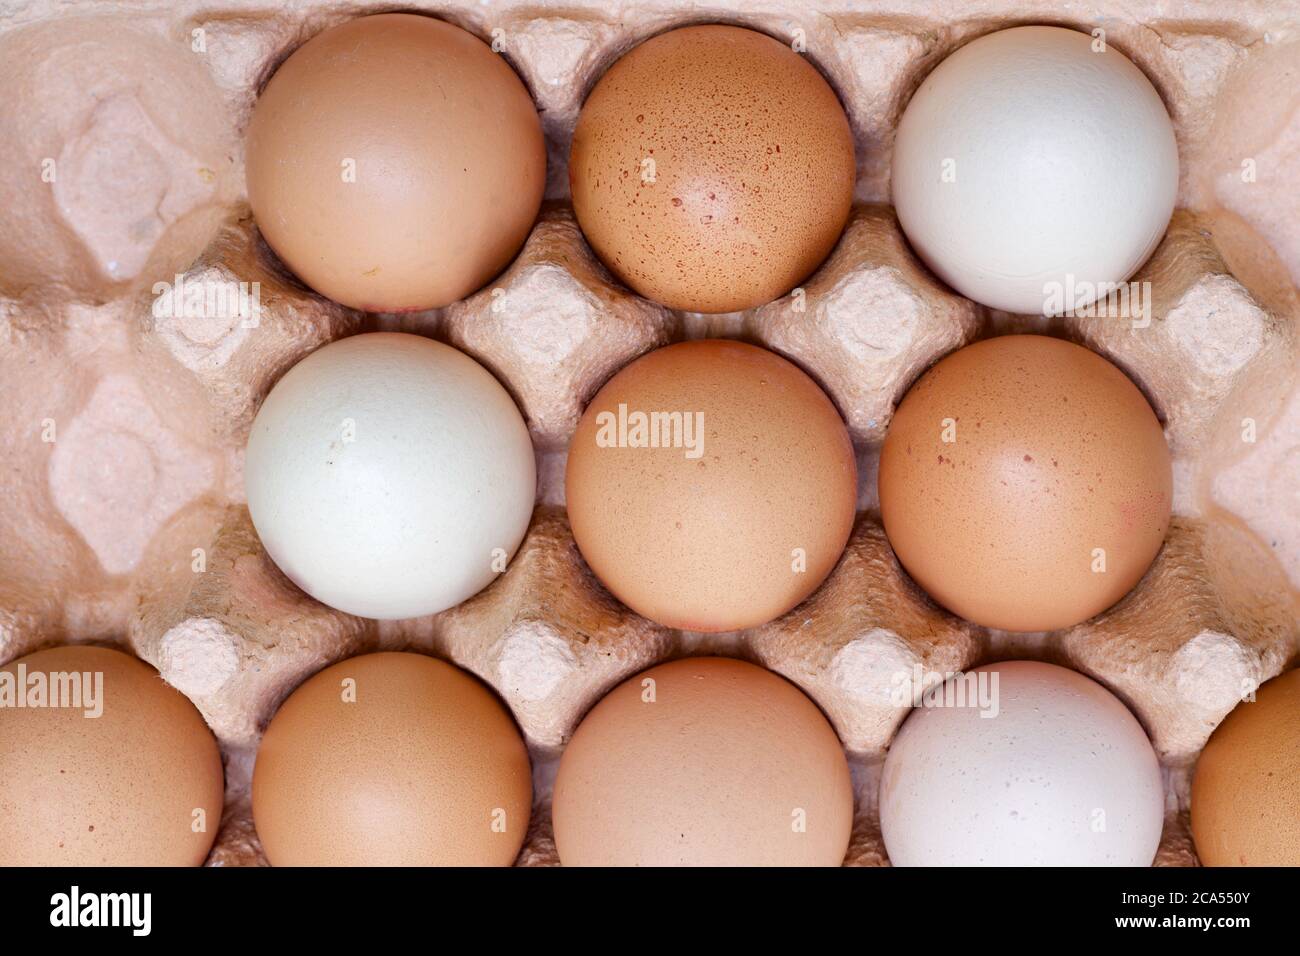 Cardboard tray of brown and white hens eggs with spaces Stock Photo